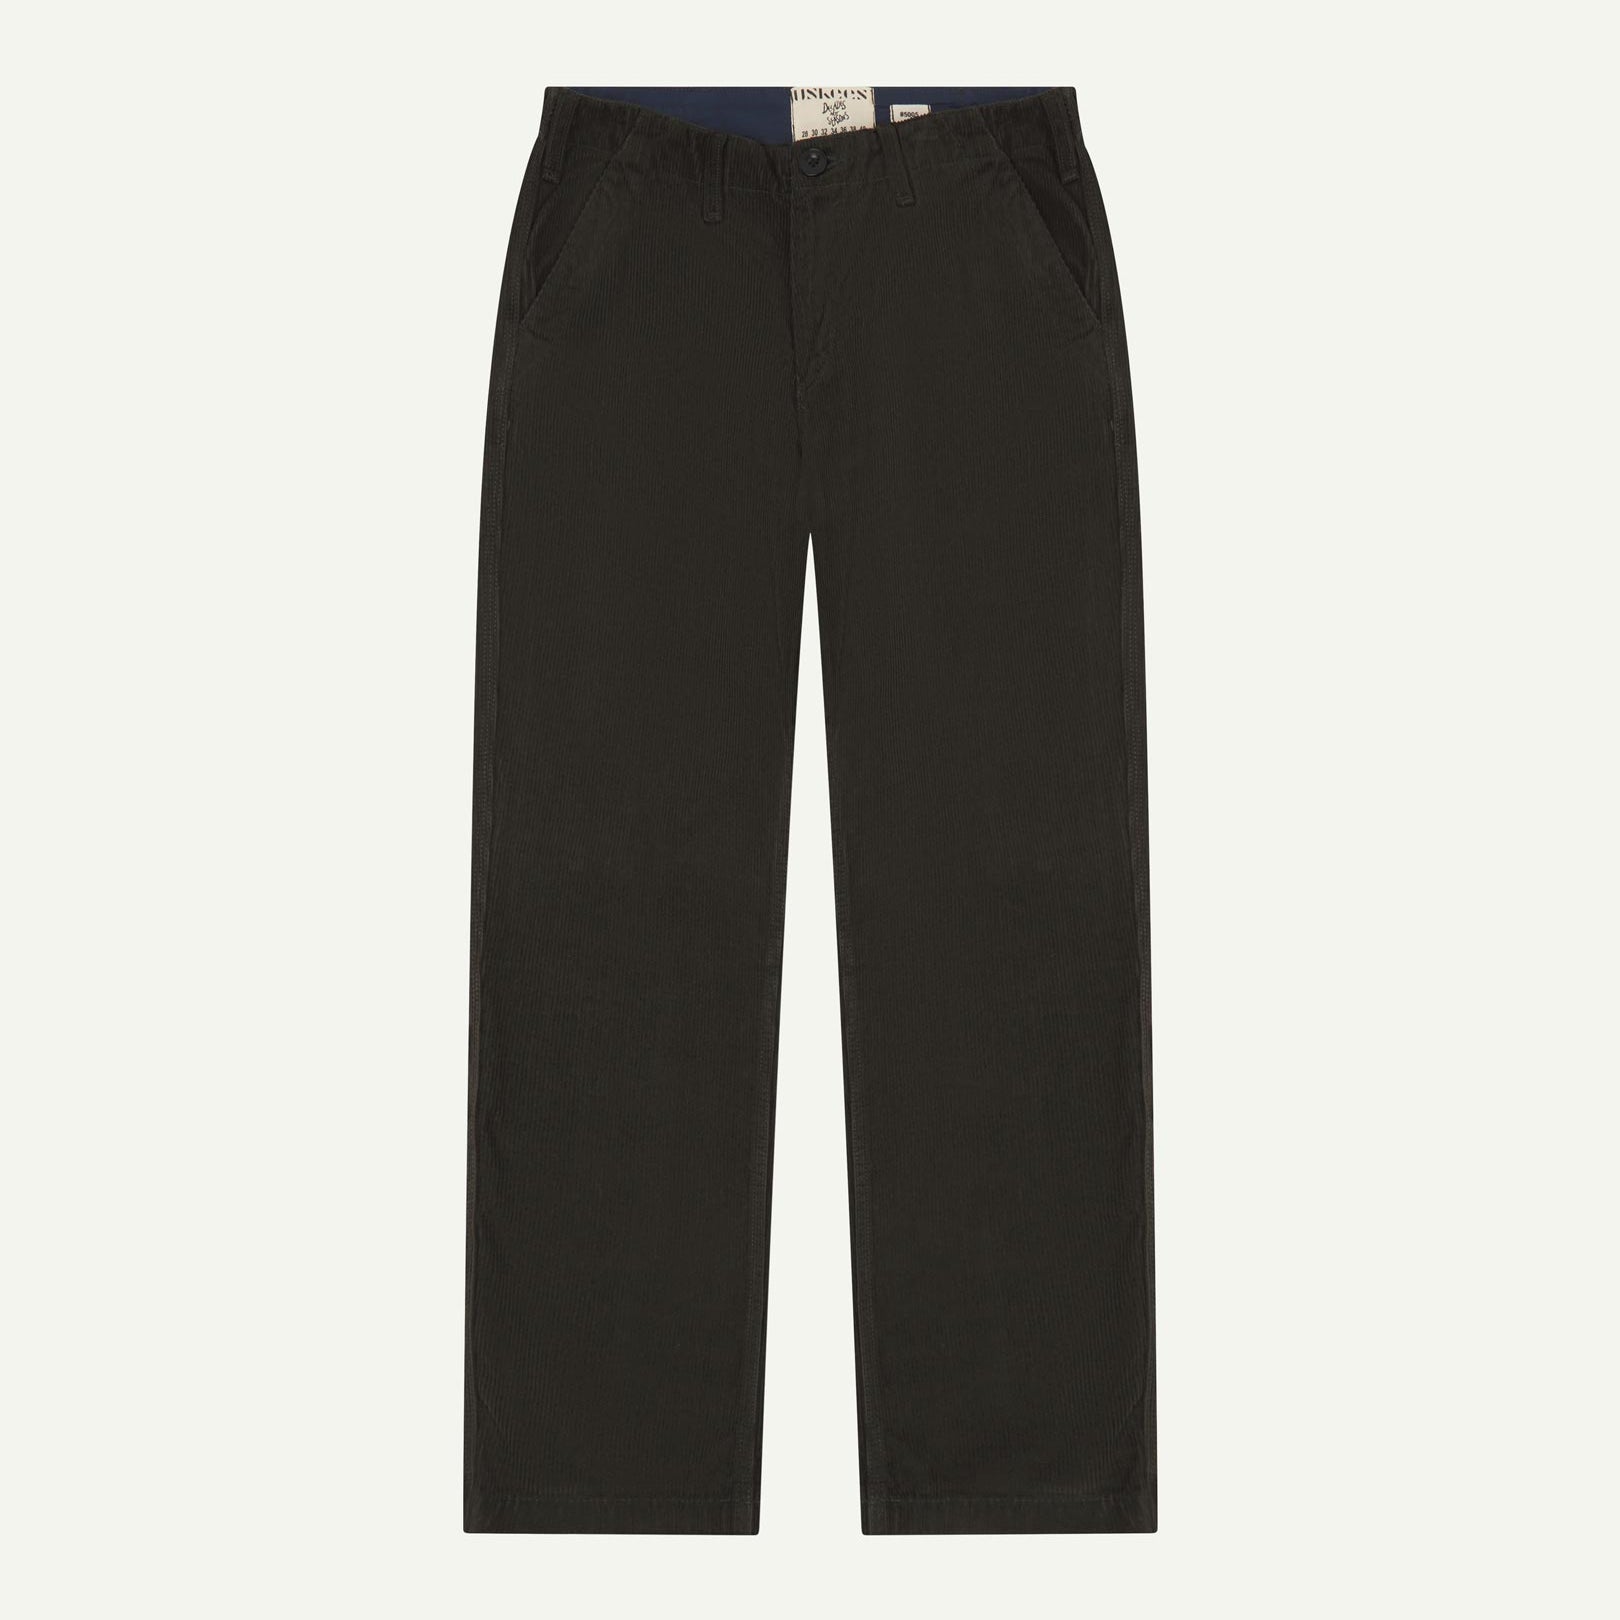 Front flat view of 5005 Uskees men's organic corduroy 'faded black' casual trousers with view of YKK zip fly and Corozo buttons.